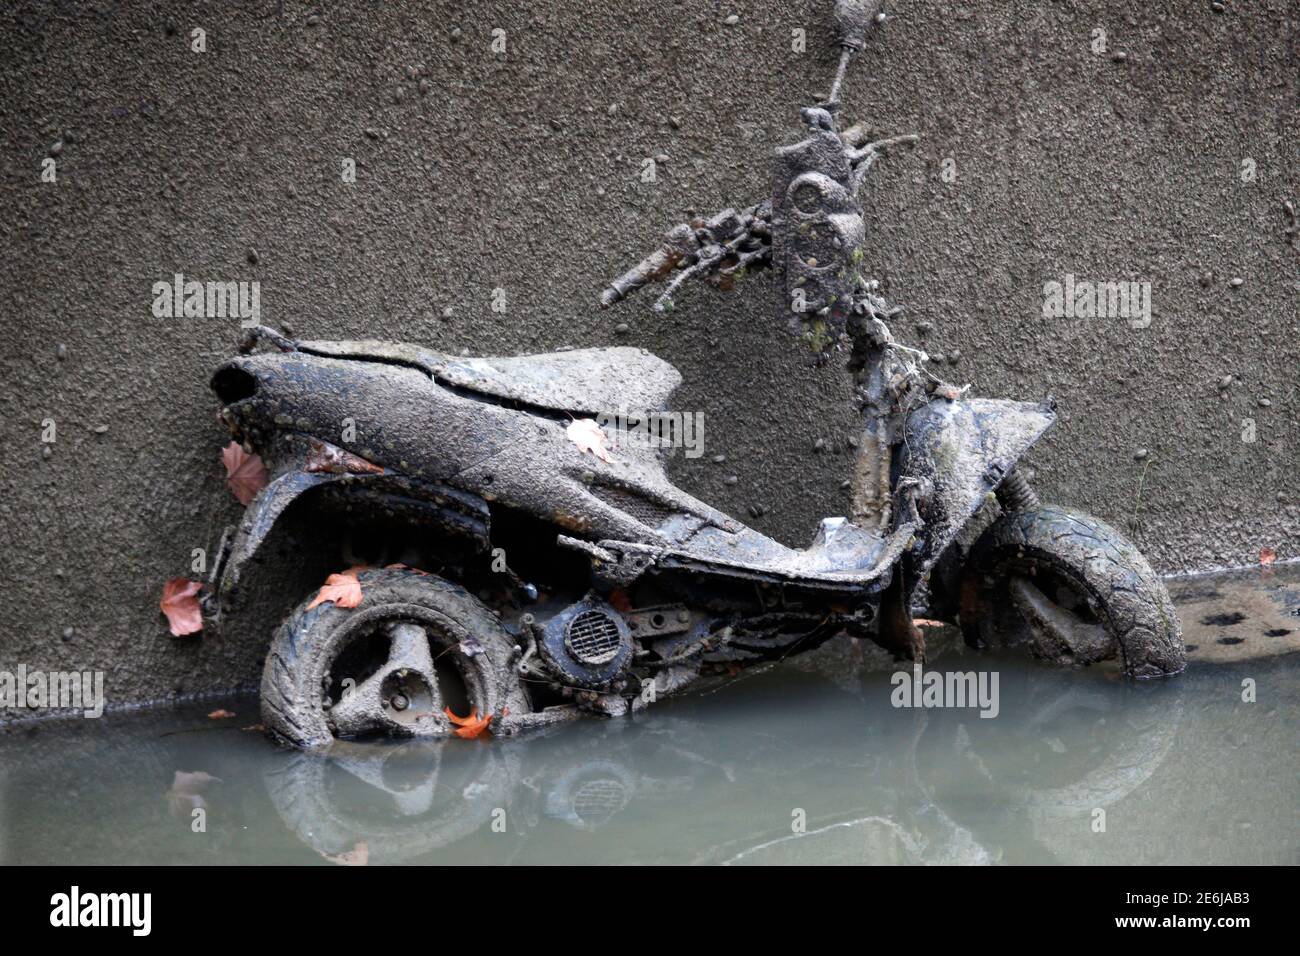 An abandoned mud covered scooter is seen during the draining of the Canal  Saint-Martin in Paris, France, January 5, 2016. Authorities start a  three-month cleanup operation of the canal St-Martin, in north-eastern